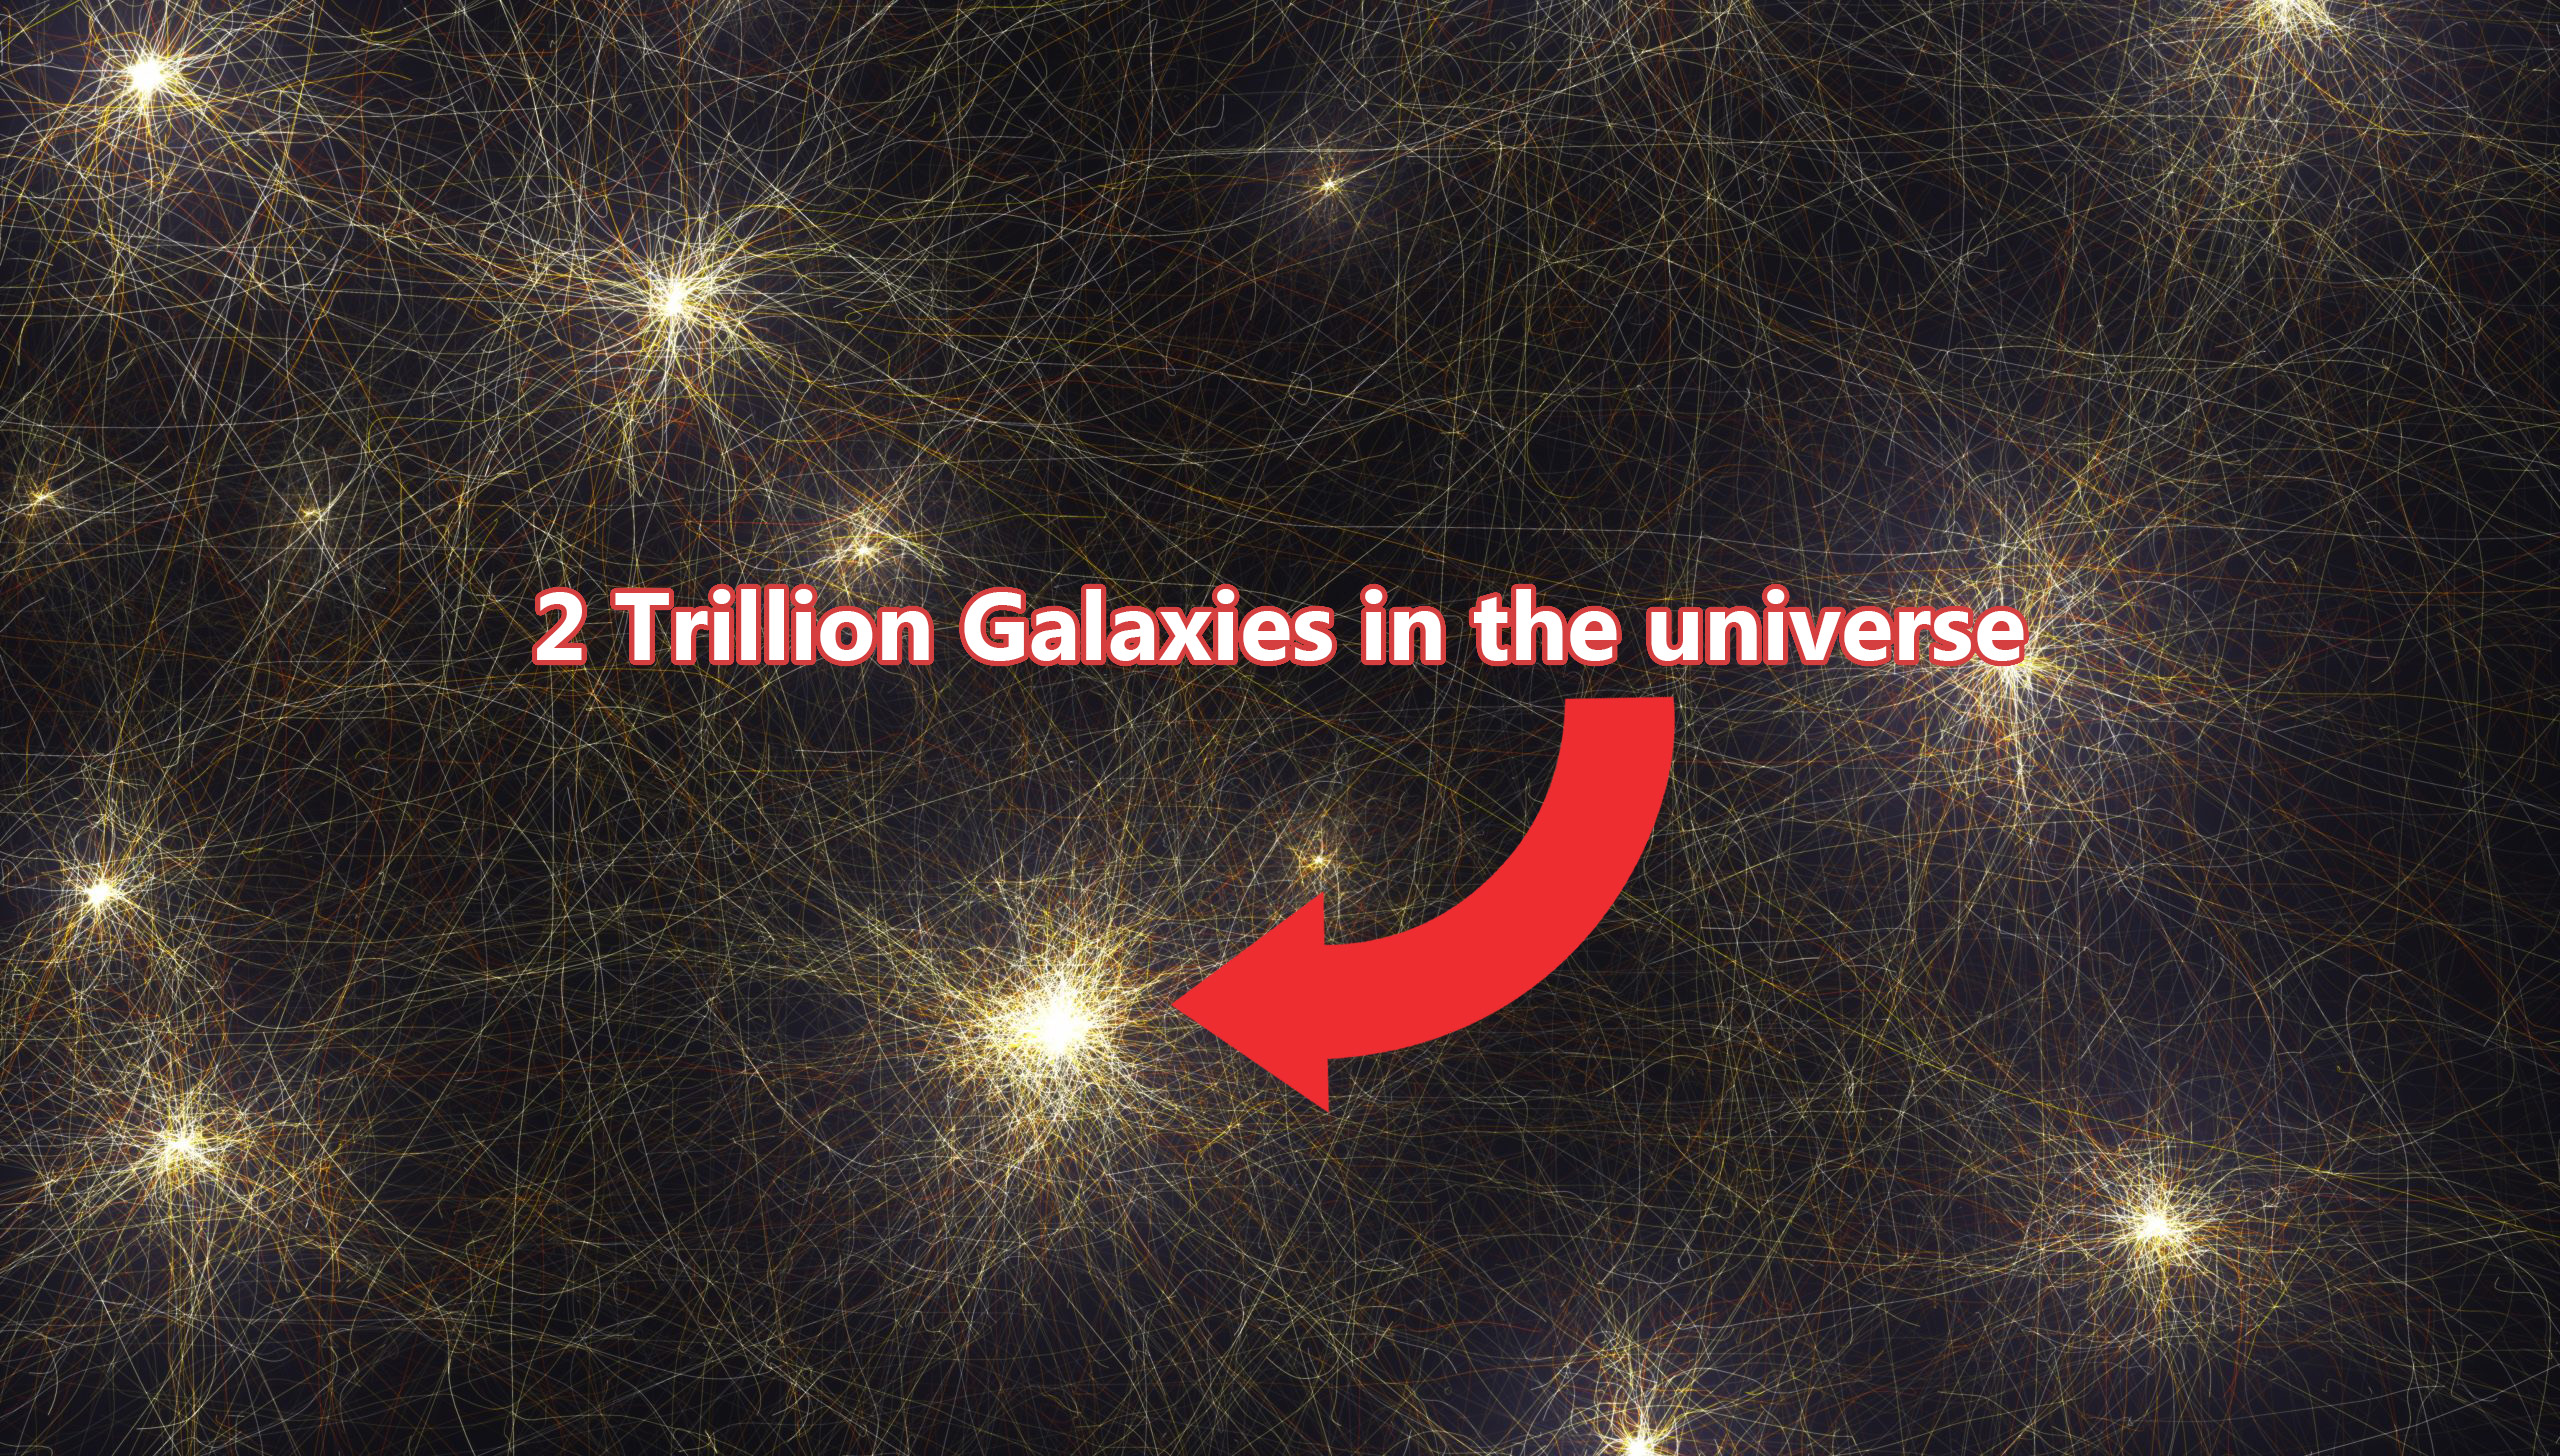 An illustration showing the total number of galaxies in the universe. Depositphotos/Curiosmos.